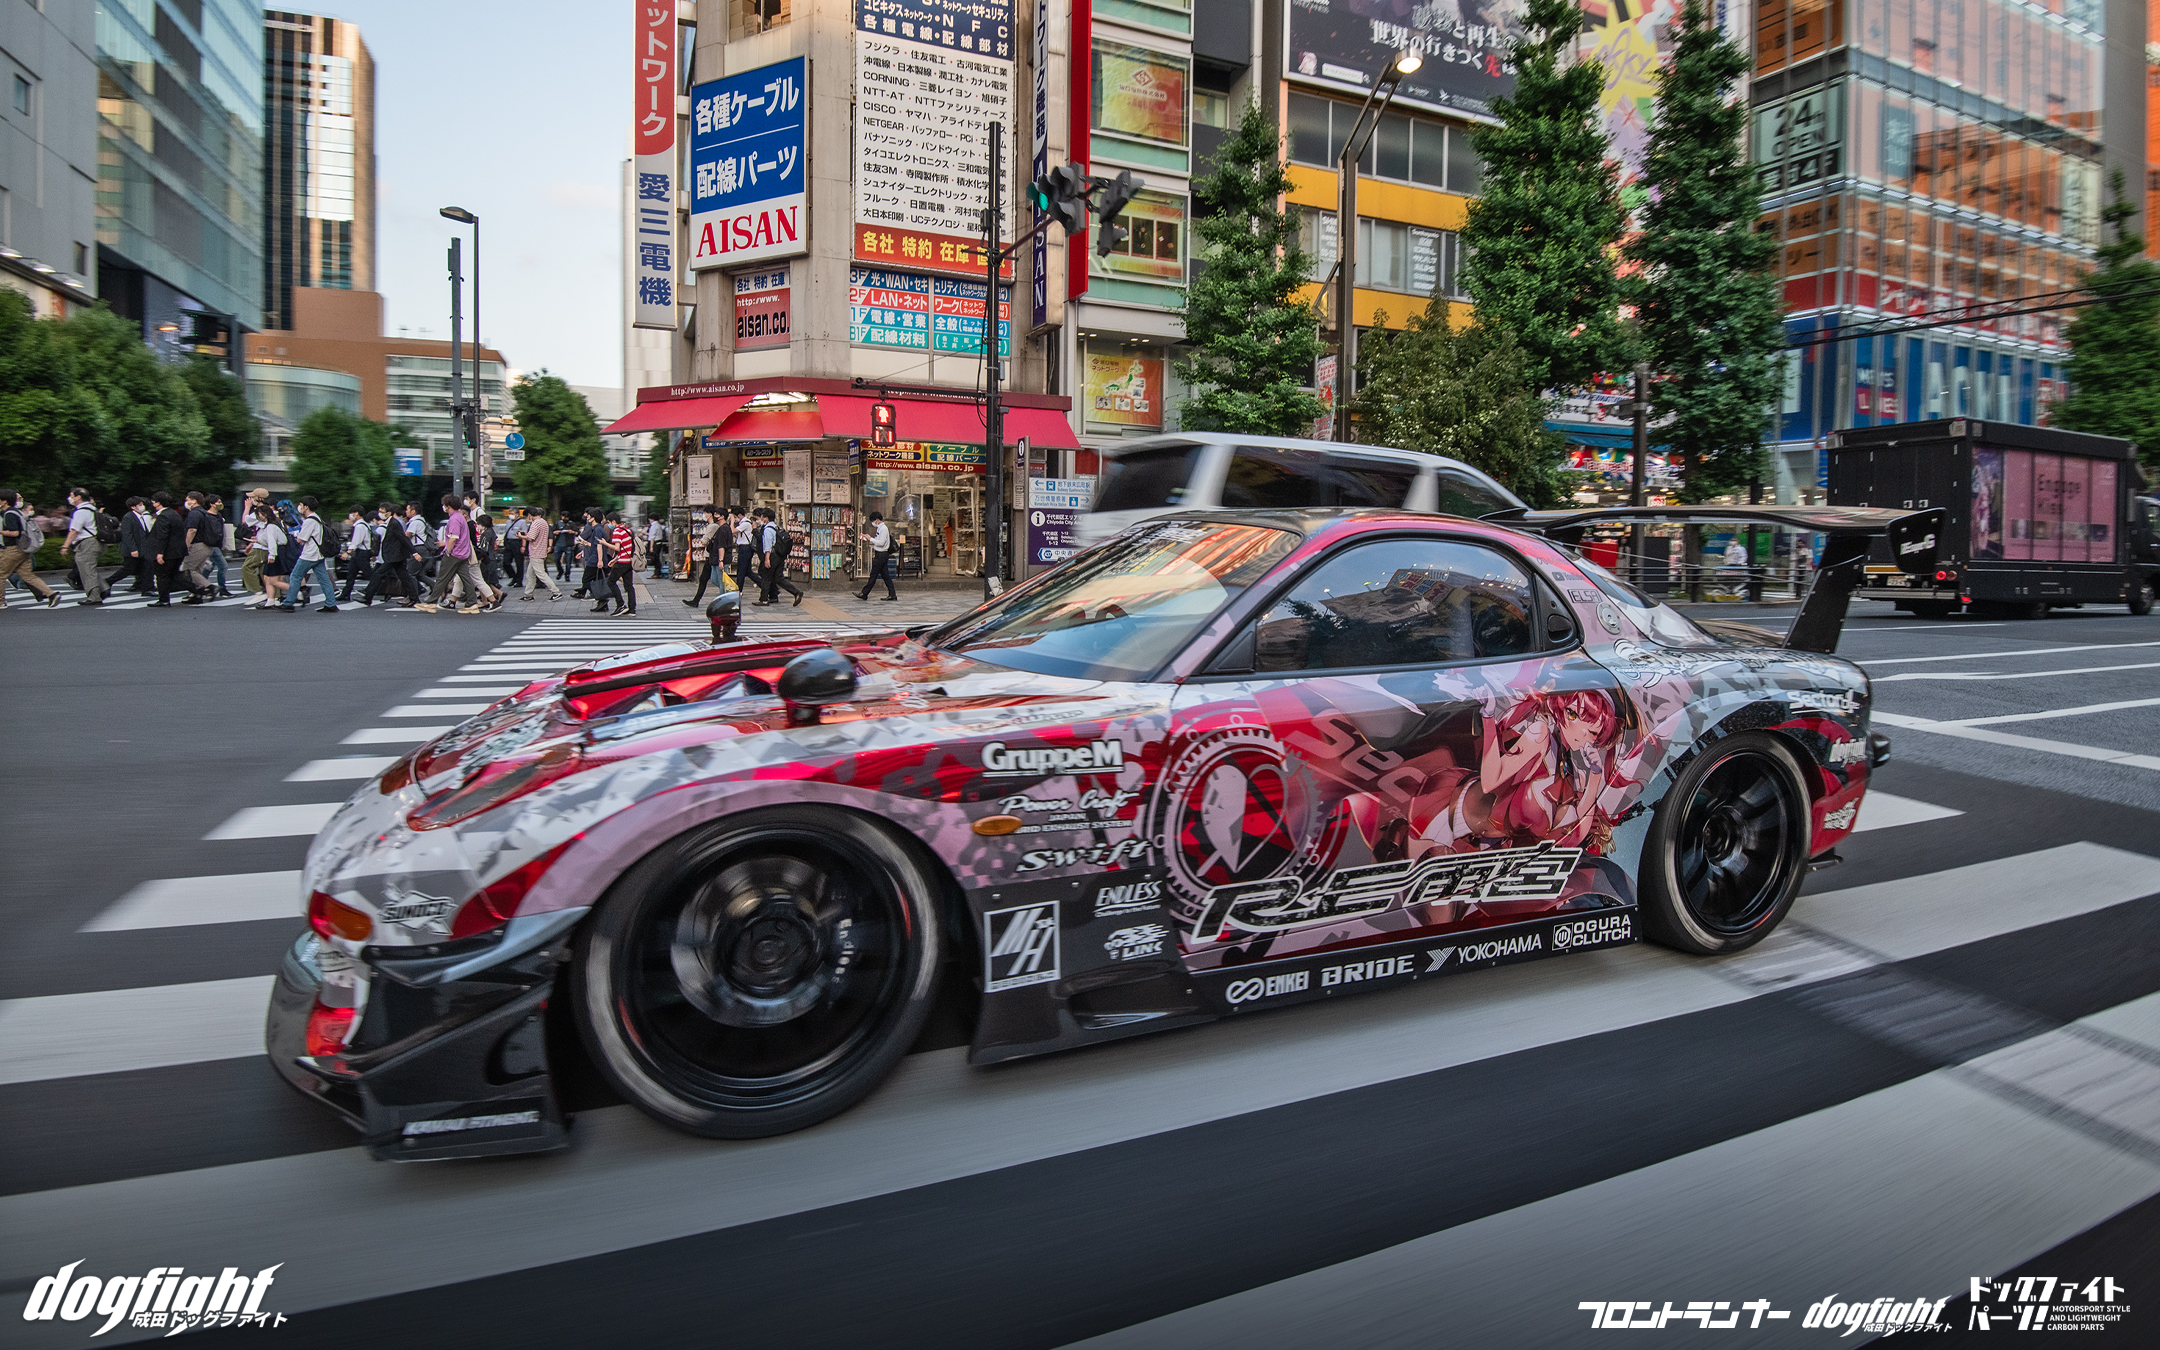 Japan's anime-loving cringeworthy car owners don't care what you think.  Meet the 'itasha' aficionados | South China Morning Post